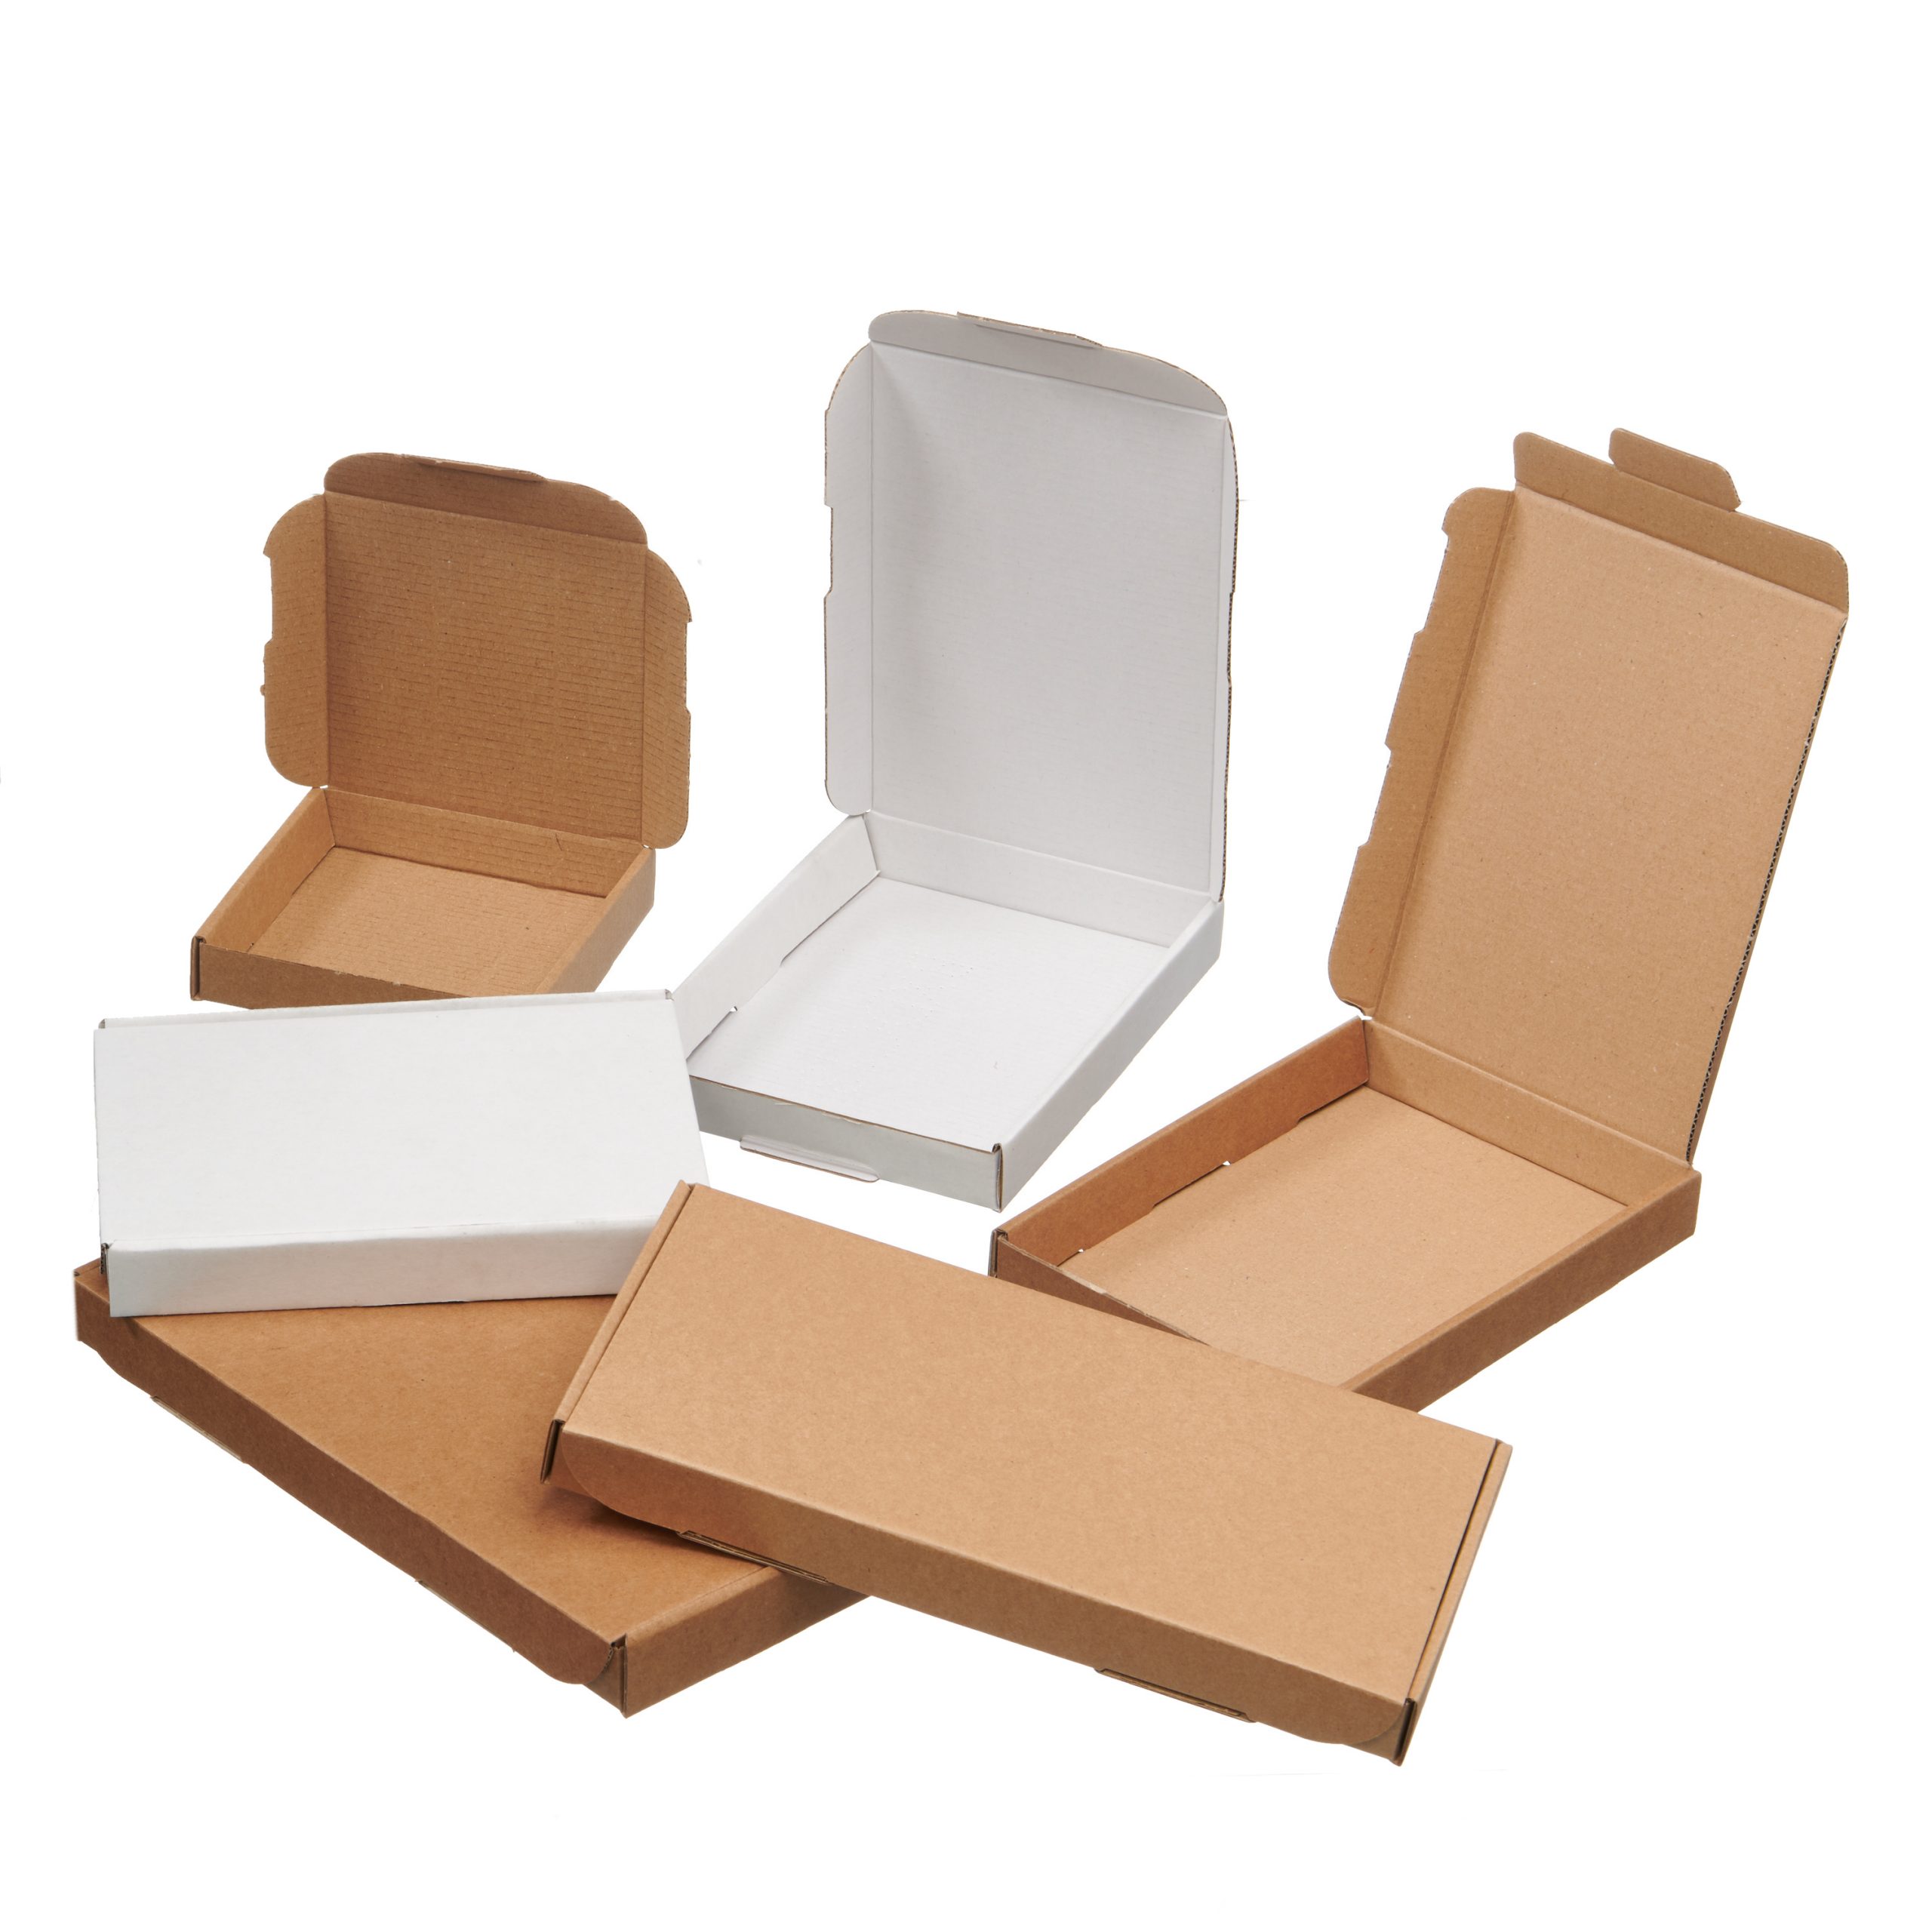 Details about   White Postal Cardboard Boxes Small Mailing Cartons Multi Listing PIP 